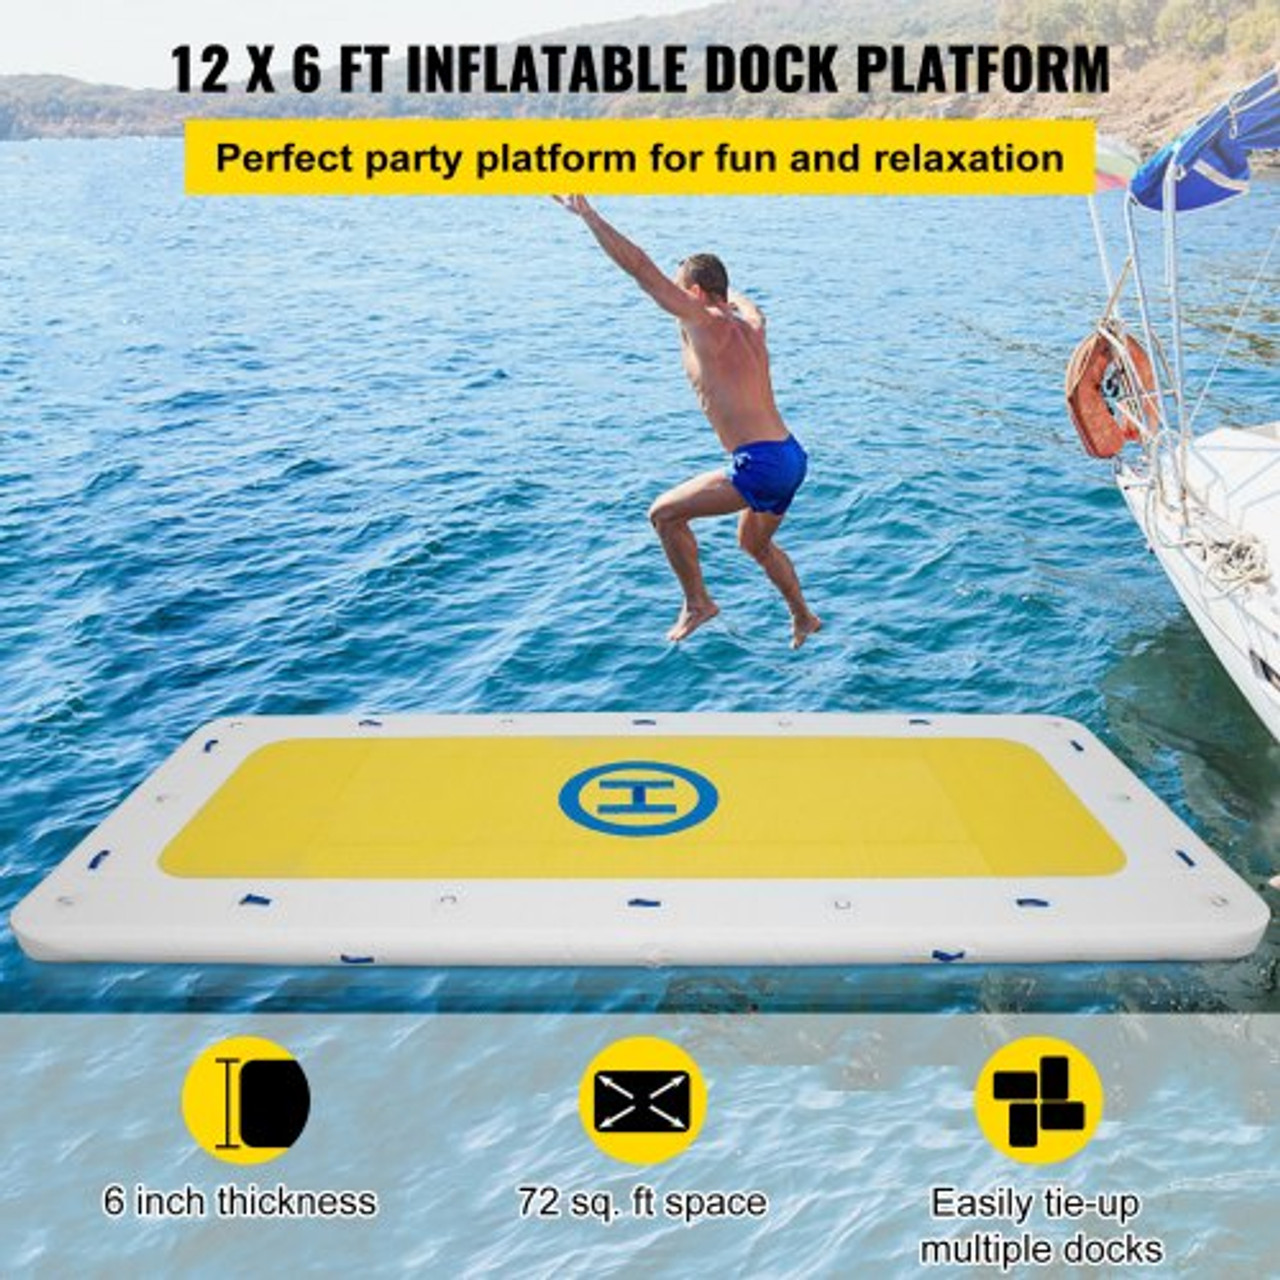 Inflatable Dock Floating Platform, 12 x 6 ft, 3-5 Person Capacity, 6 inches Thick, Swim Dock with Hand Pump, Electric Air Pump & Storage Bag, Drop Stitch PVC Non-Slip Raft for Pool Beach Ocean